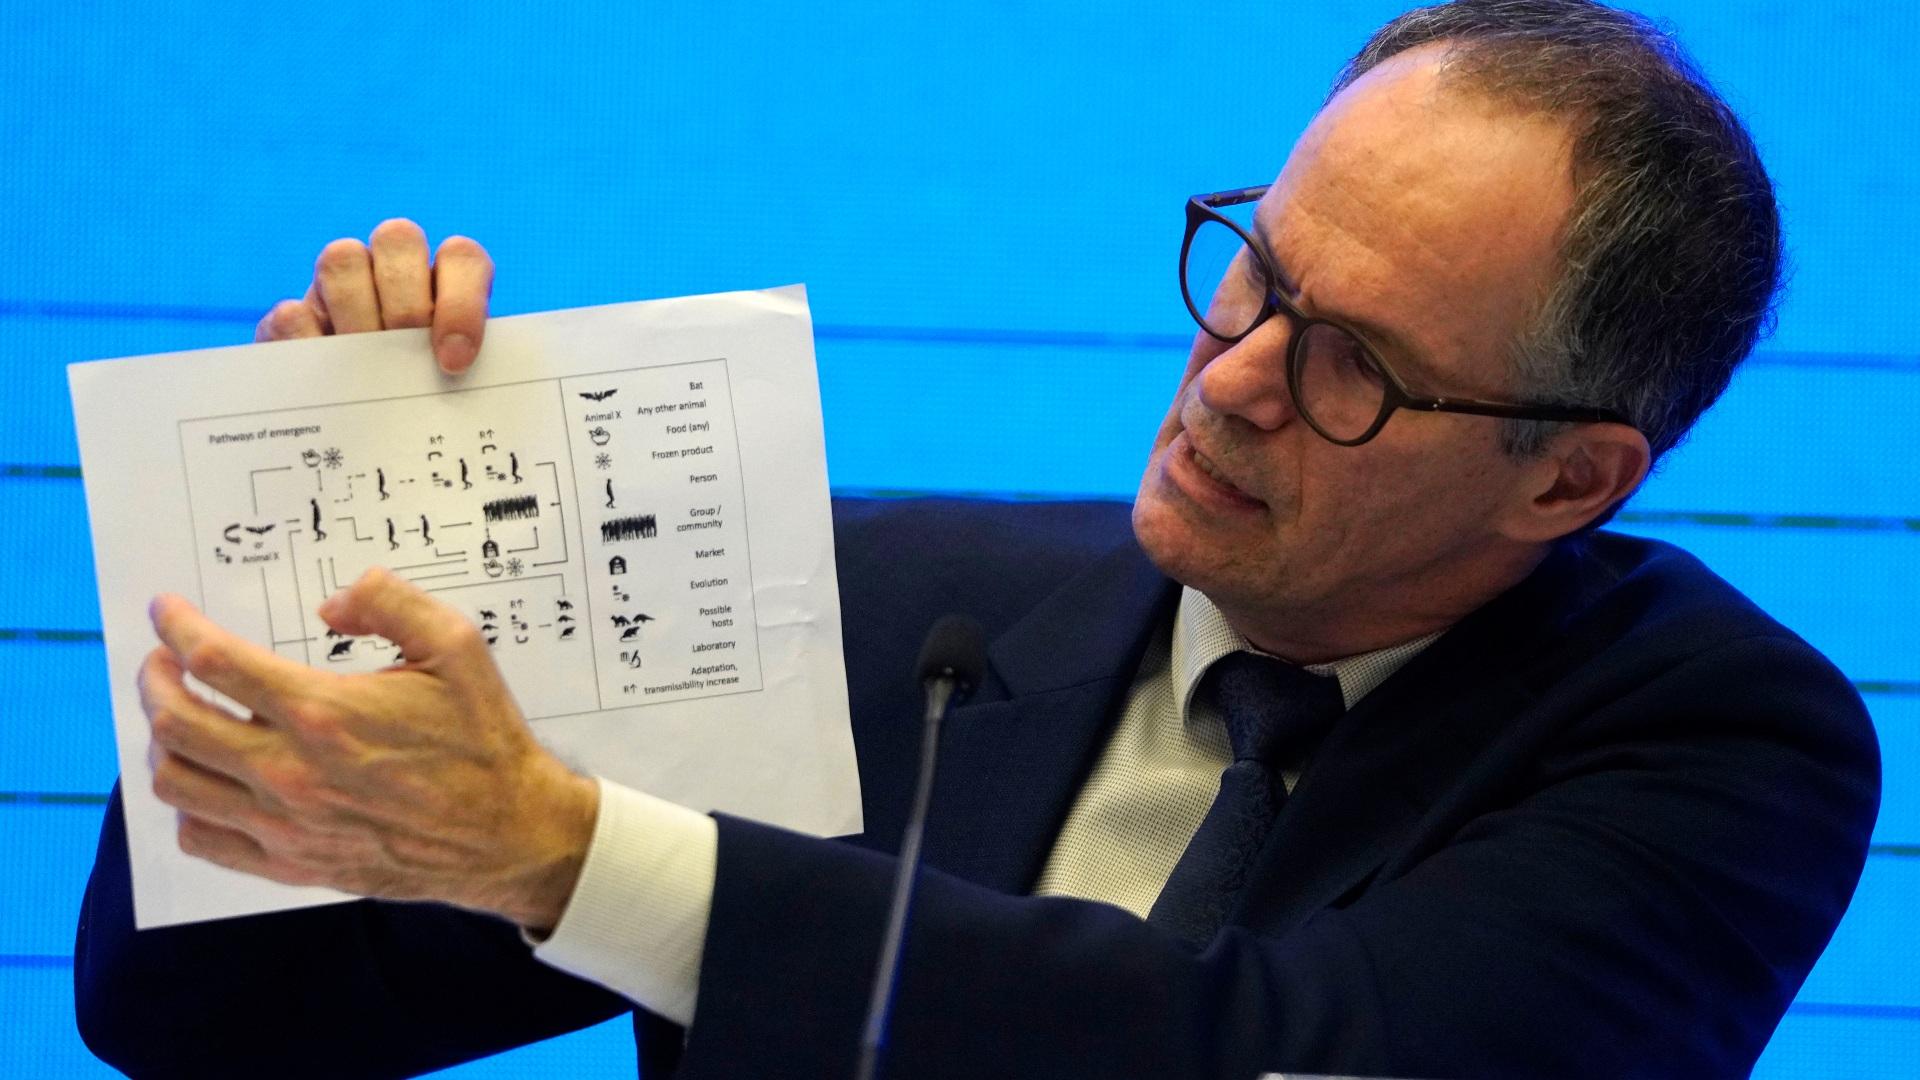 In this Feb. 9, 2021, file photo, Peter Ben Embarek of the World Health Organization team holds up a chart showing pathways of transmission of the virus during a joint news conference at the end of the WHO mission in Wuhan in central China's Hubei province. (AP Photo / Ng Han Guan, File)